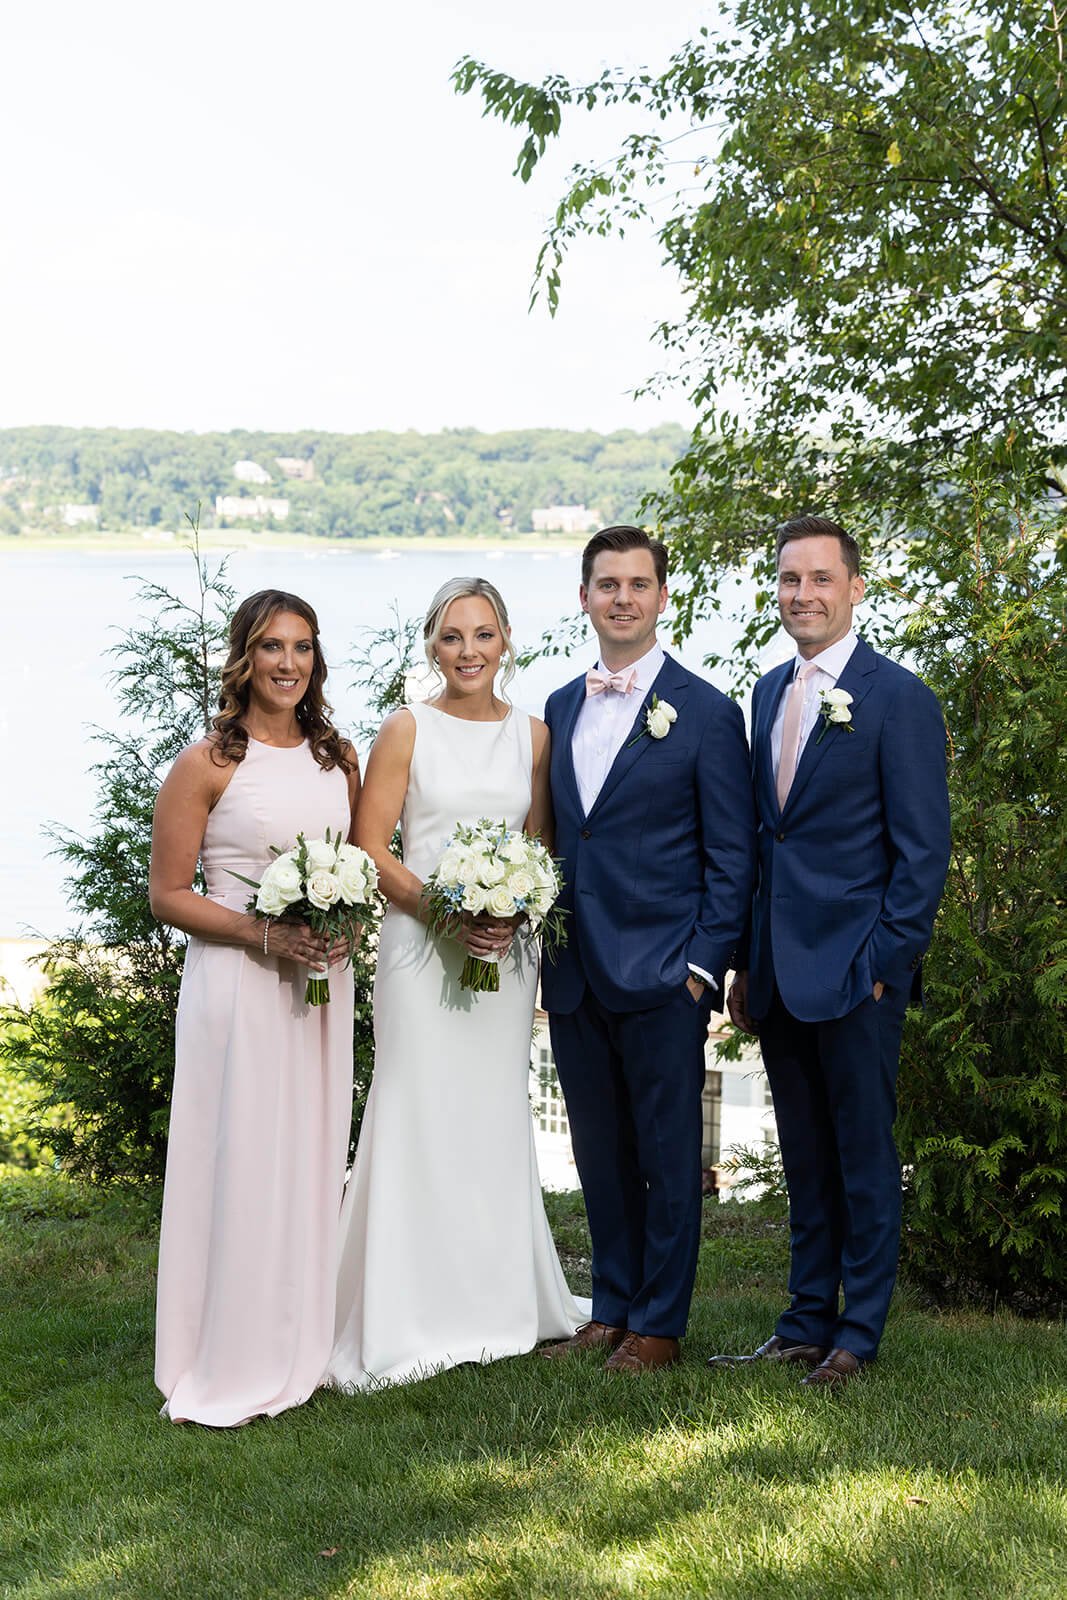 Bridal party portrait with the best man wearing a navy suit and the maid of honor wearing a blush pink gown